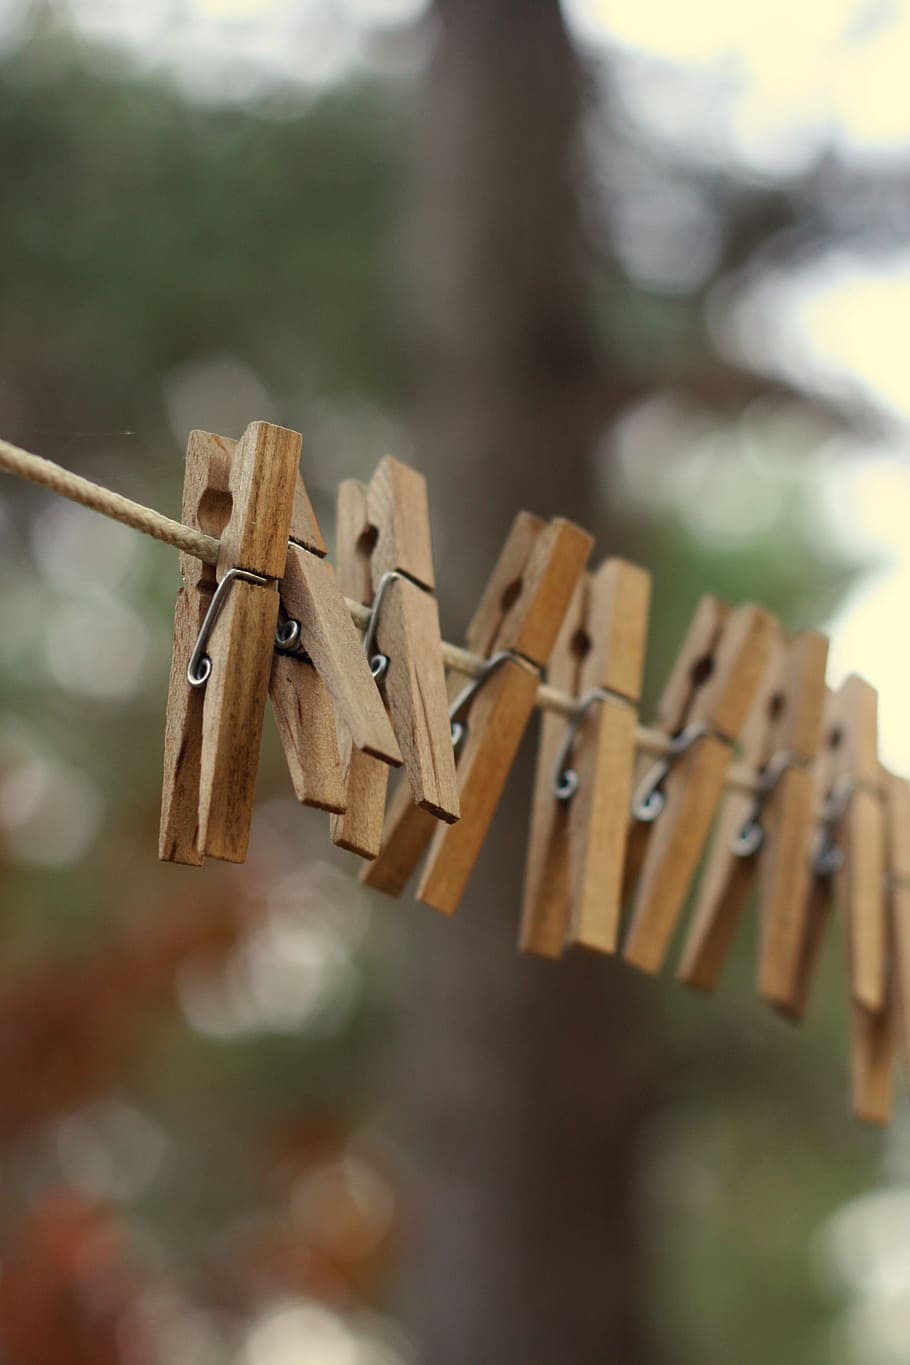 clothesline, clothespin, rustic, laundry, line, dry, hang, rope, housework, clean, drying, summer, pin, washing, hanging, work, wash, string, autumn, household, cord, clothes-pin, outdoor, yard, HD wallpaper